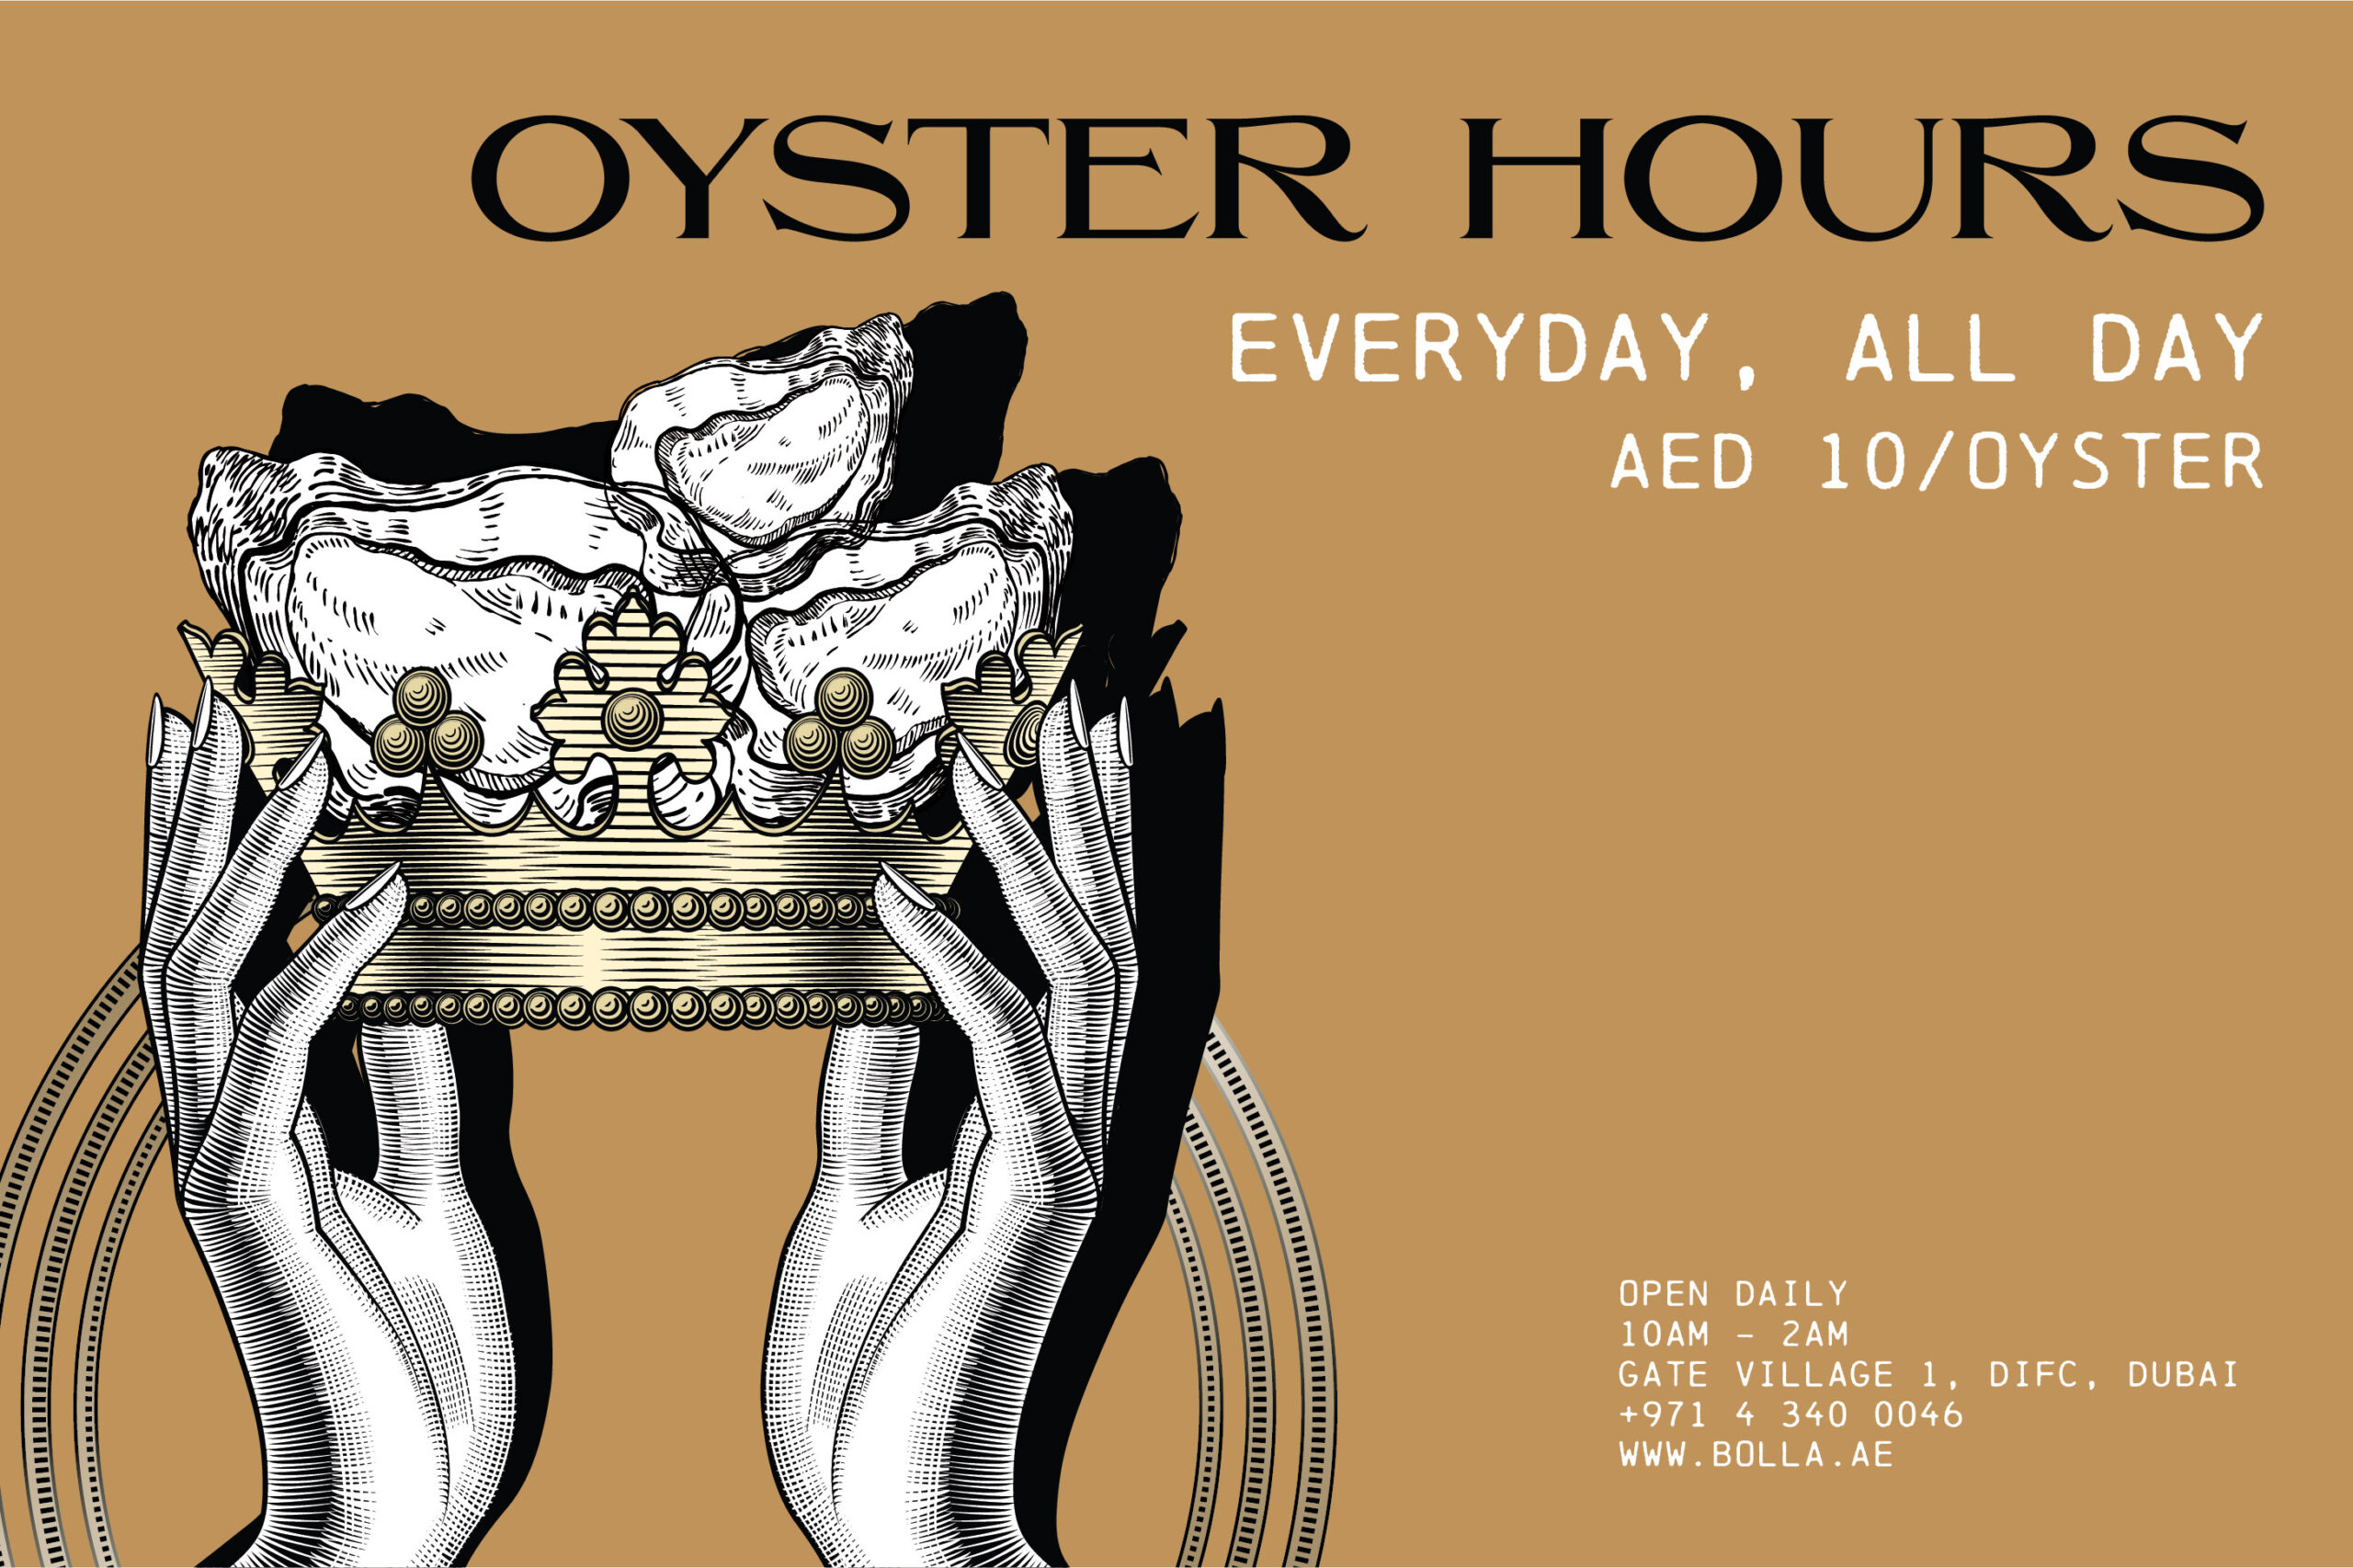 Oysters Hour